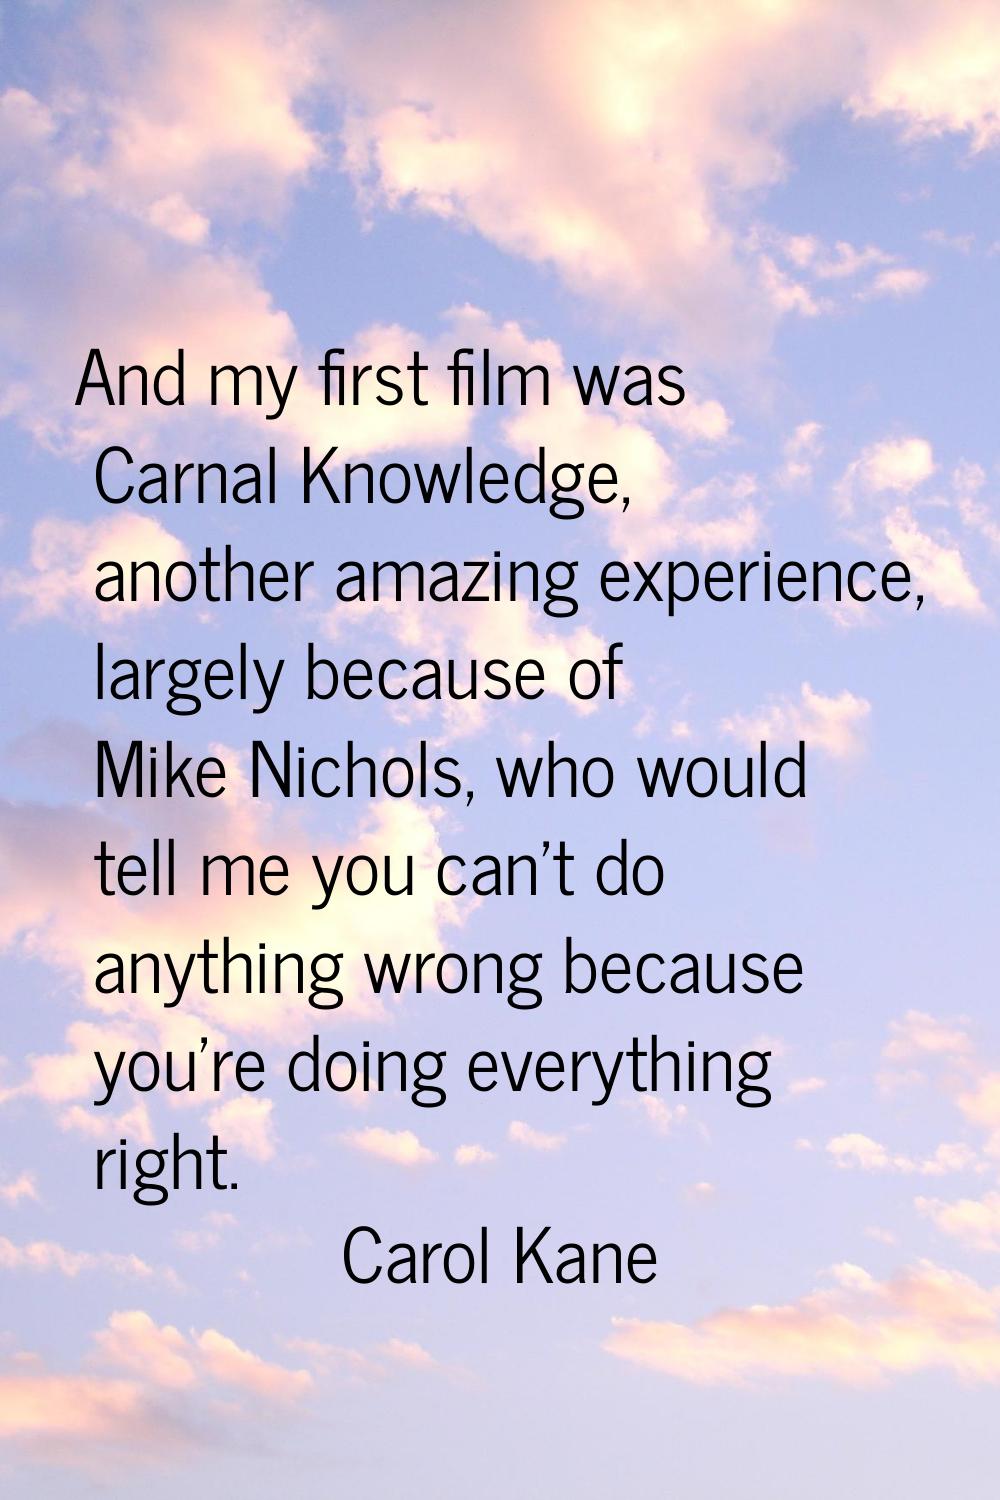 And my first film was Carnal Knowledge, another amazing experience, largely because of Mike Nichols